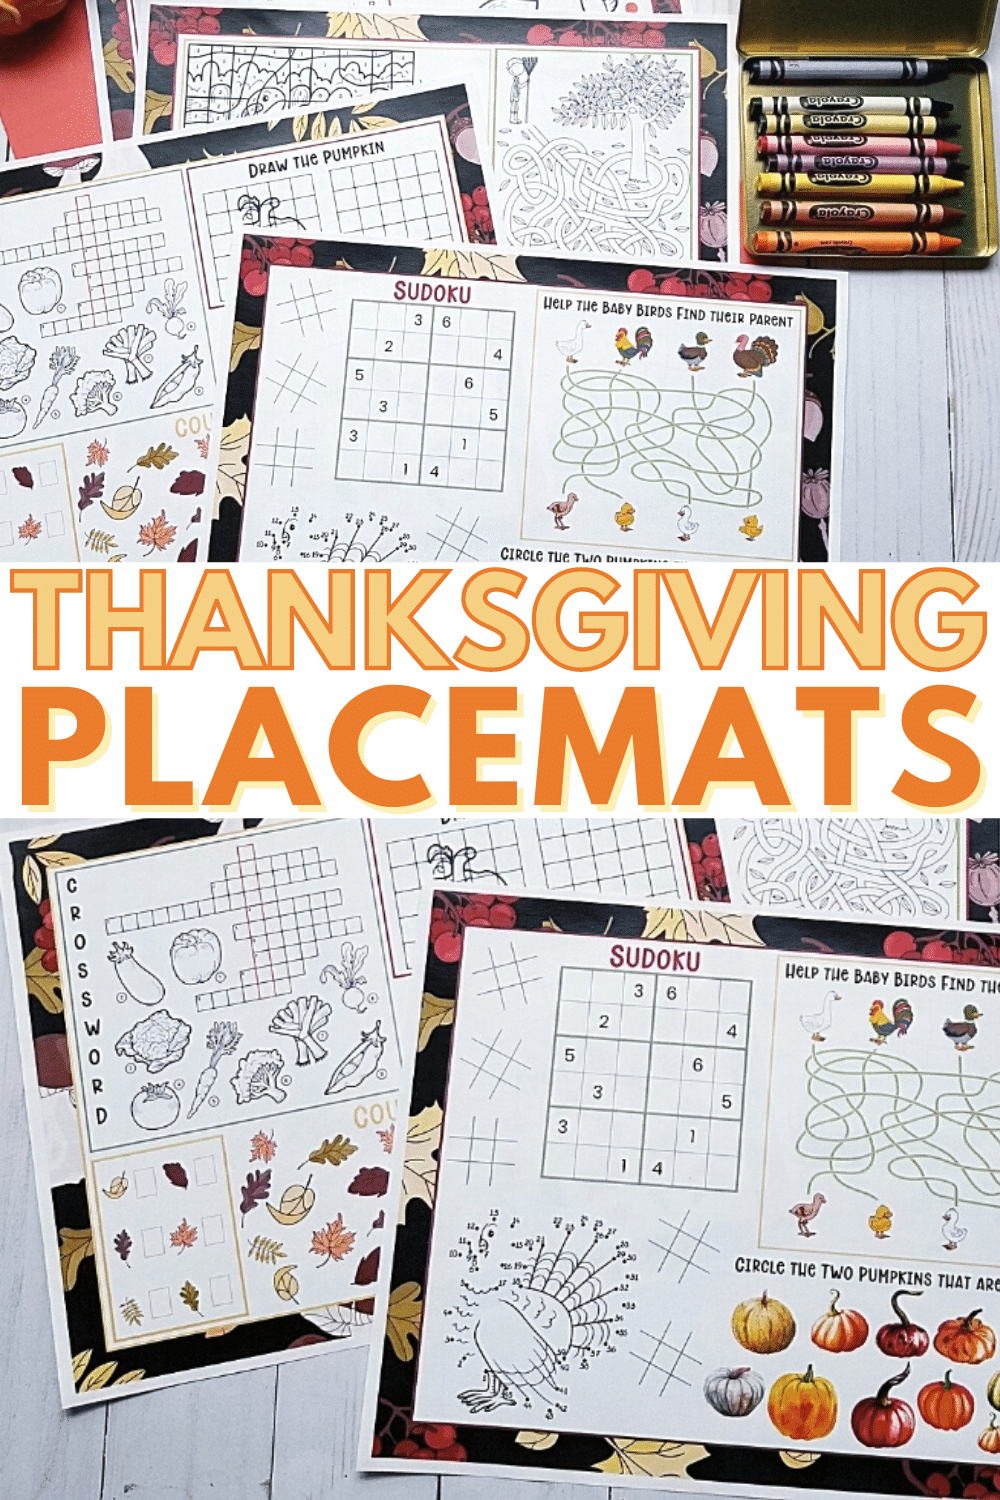 Make Thanksgiving creative and fun with these Thanksgiving Printable Placemats! The kids can use their minds while waiting for lunch! #thanksgivingprintable #thanksgivingplacemats #placemats #freeprintable #forkids via @wondermomwannab